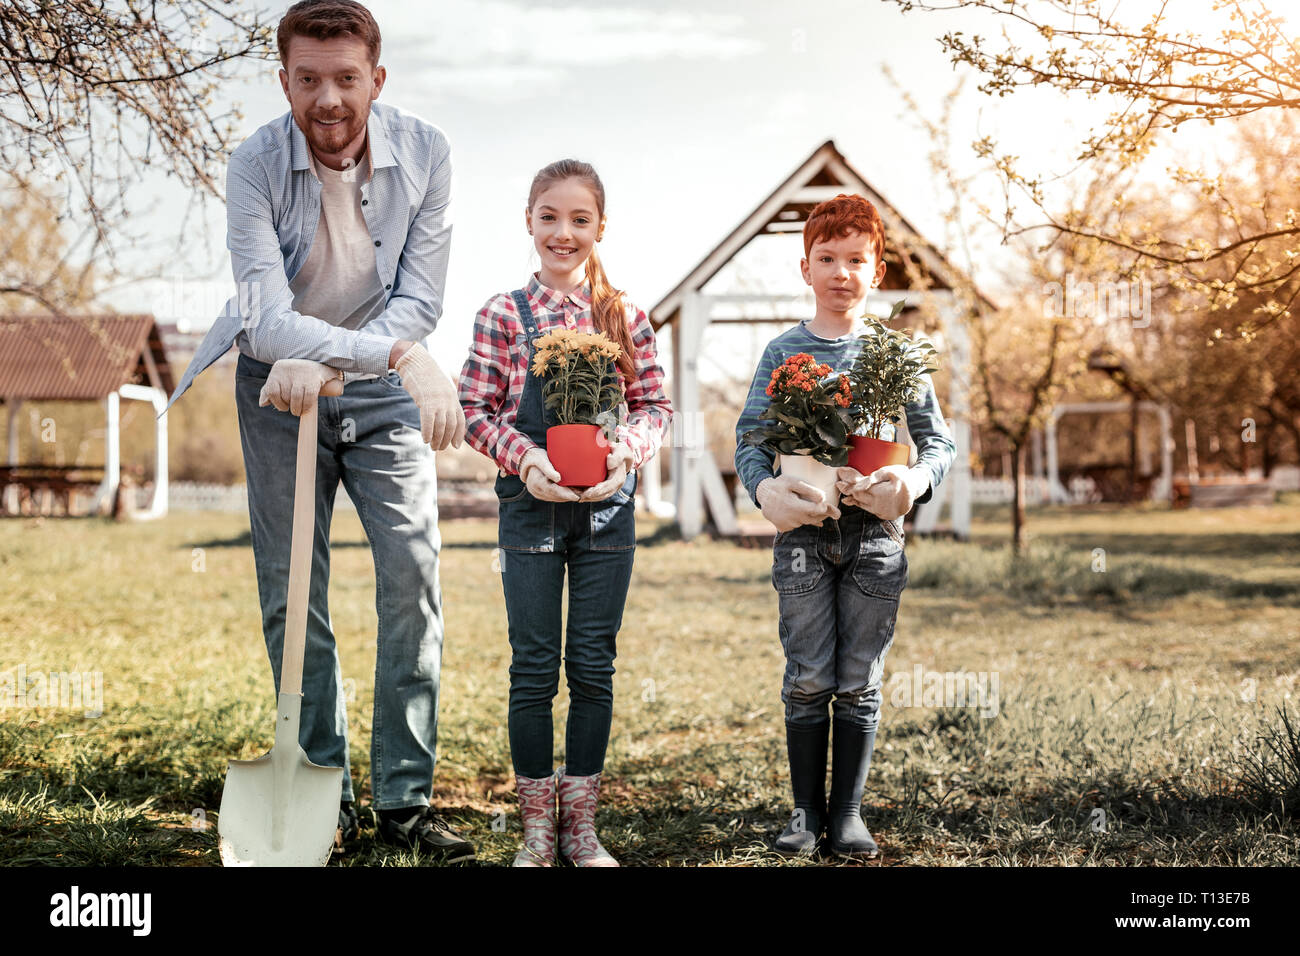 Happy family for their man in village Stock Photo